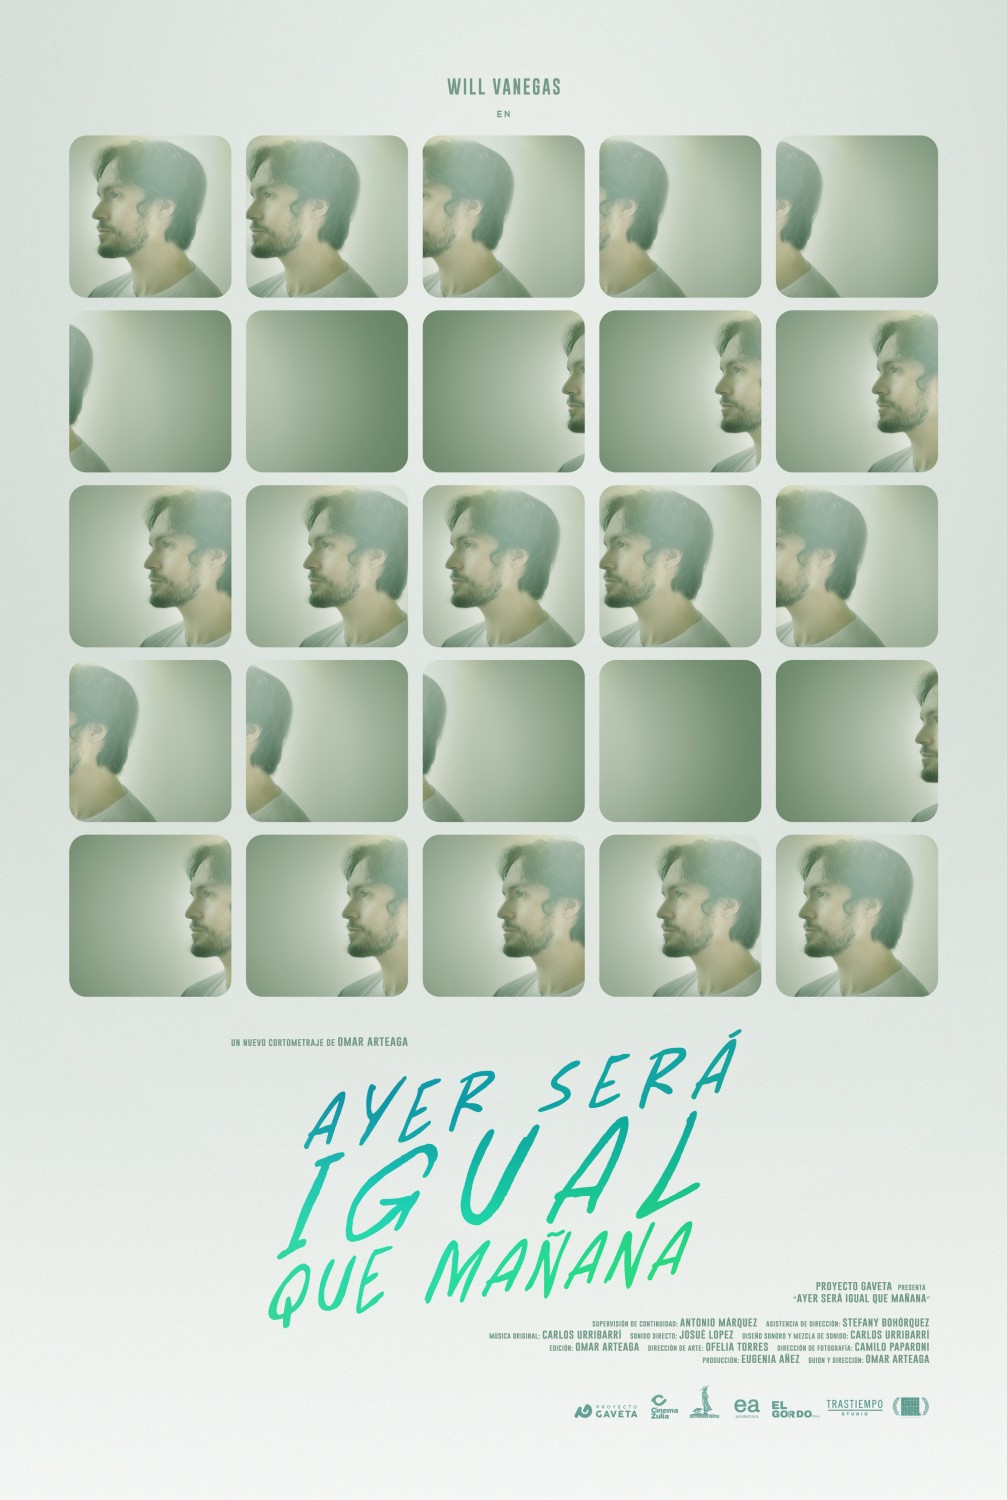 Extra Large Movie Poster Image for Ayer Ser Igual Que Maana